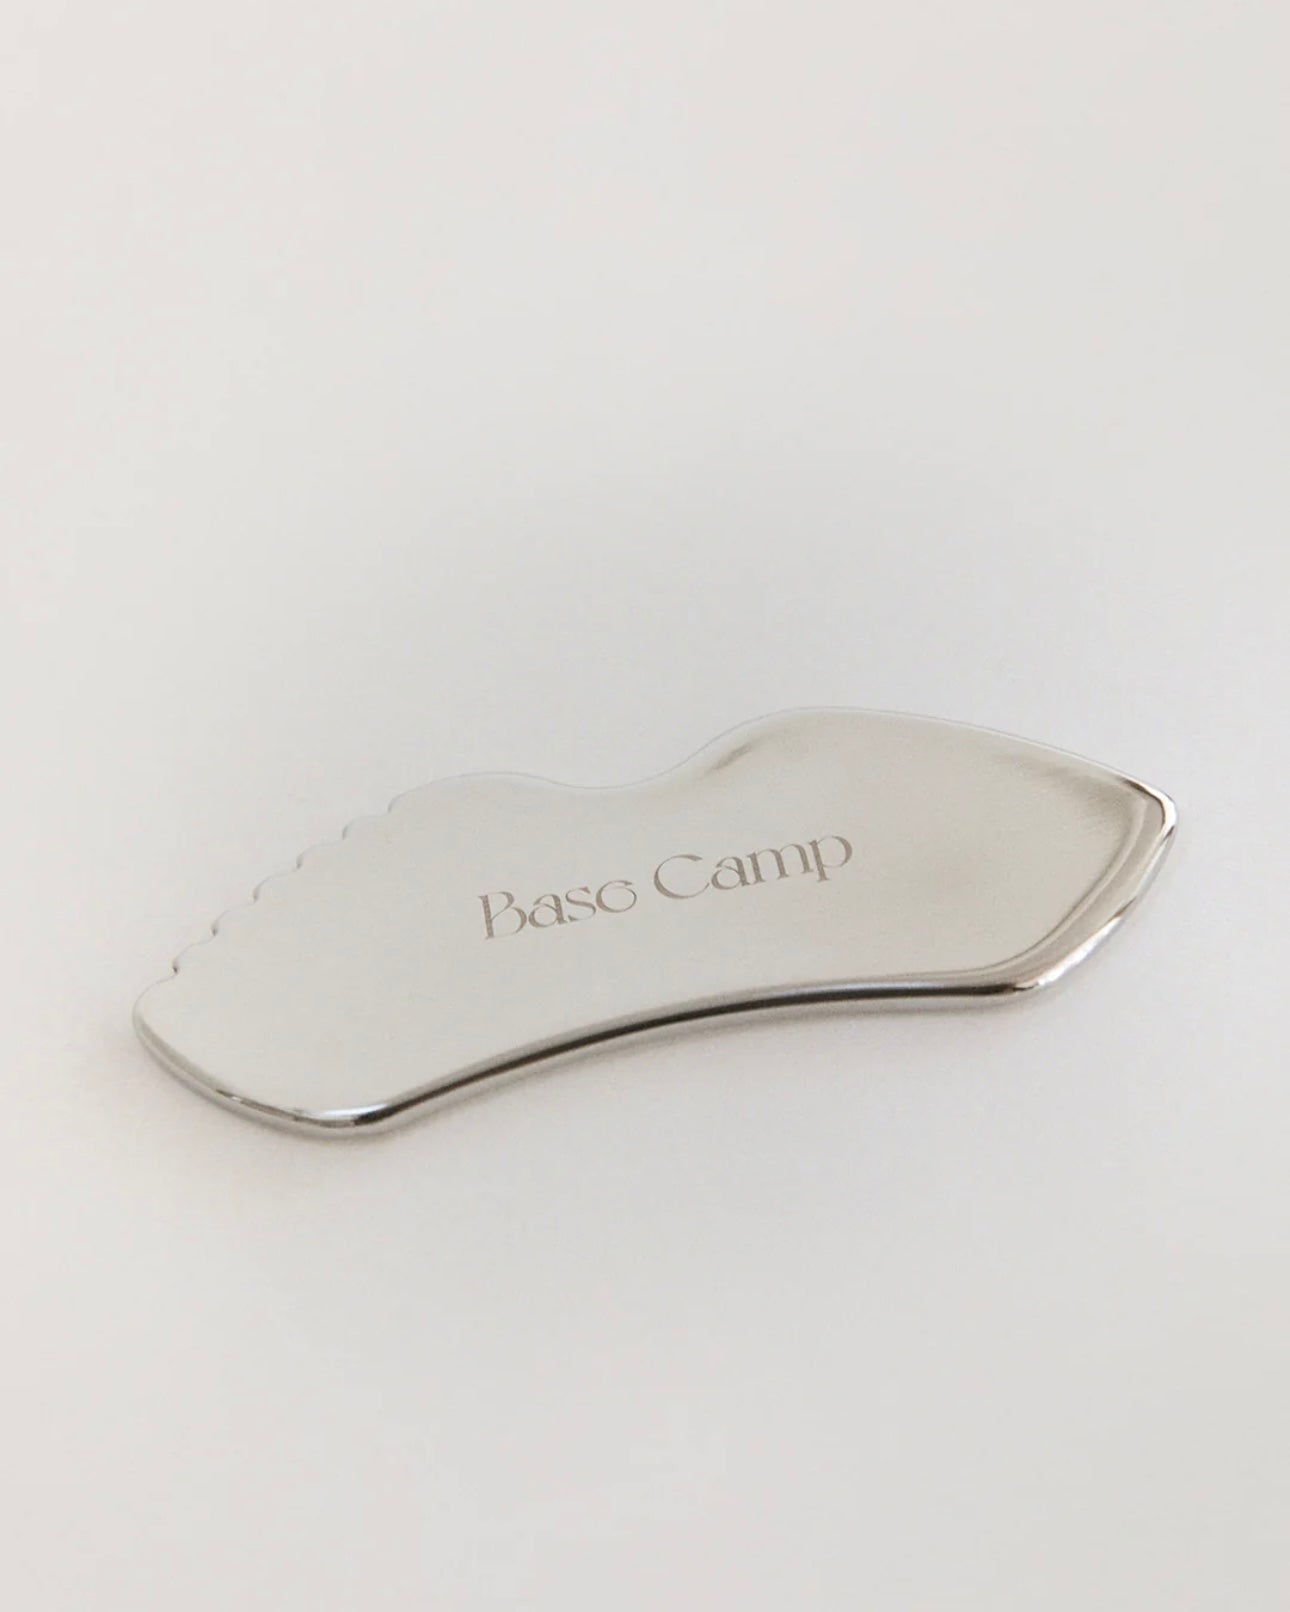 Stainless Steel Gua Sha Lifting Tool